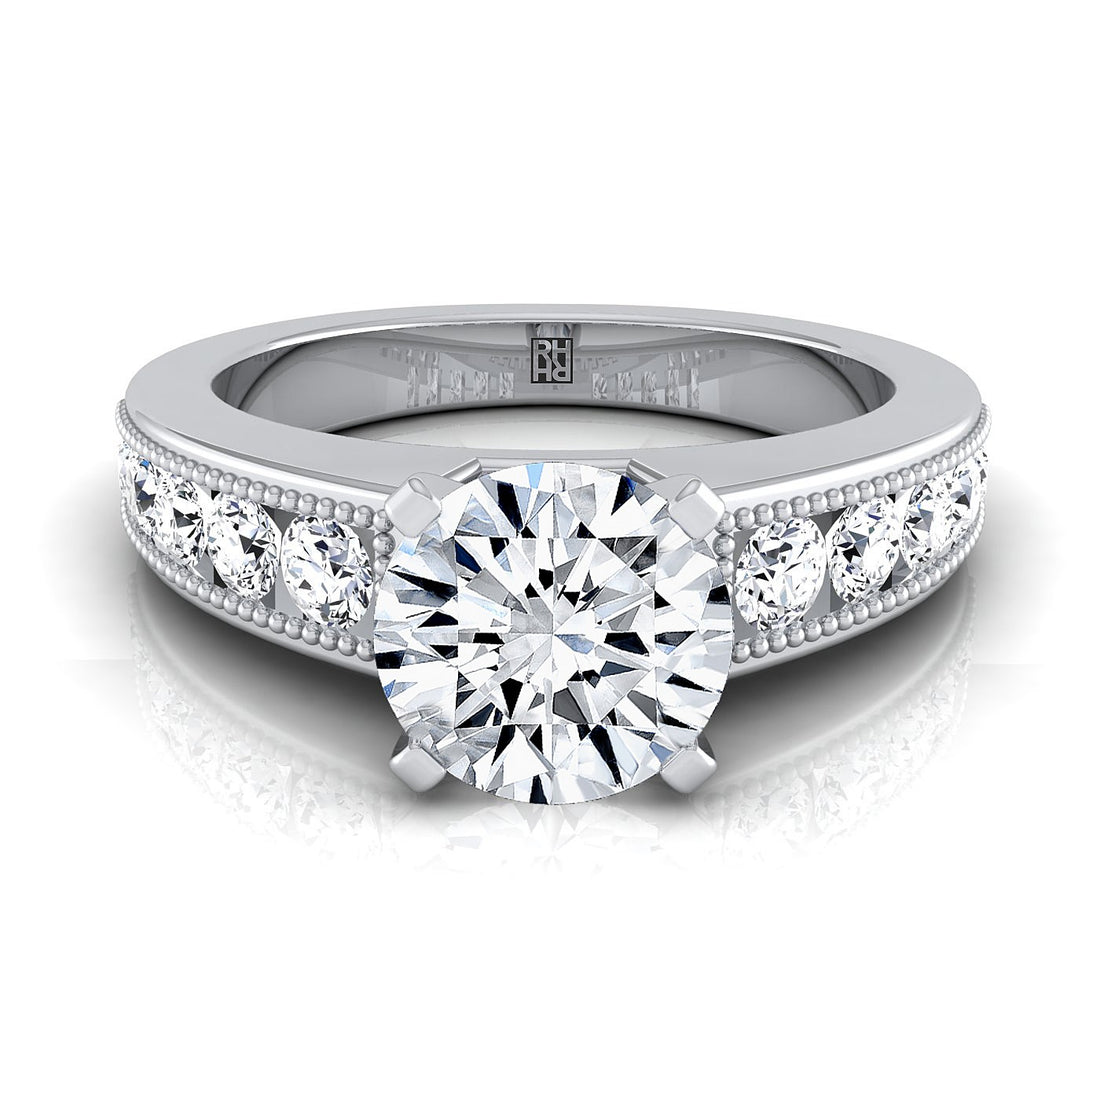 The Pros and Cons of a Diamond Channel Set Eternity Ring